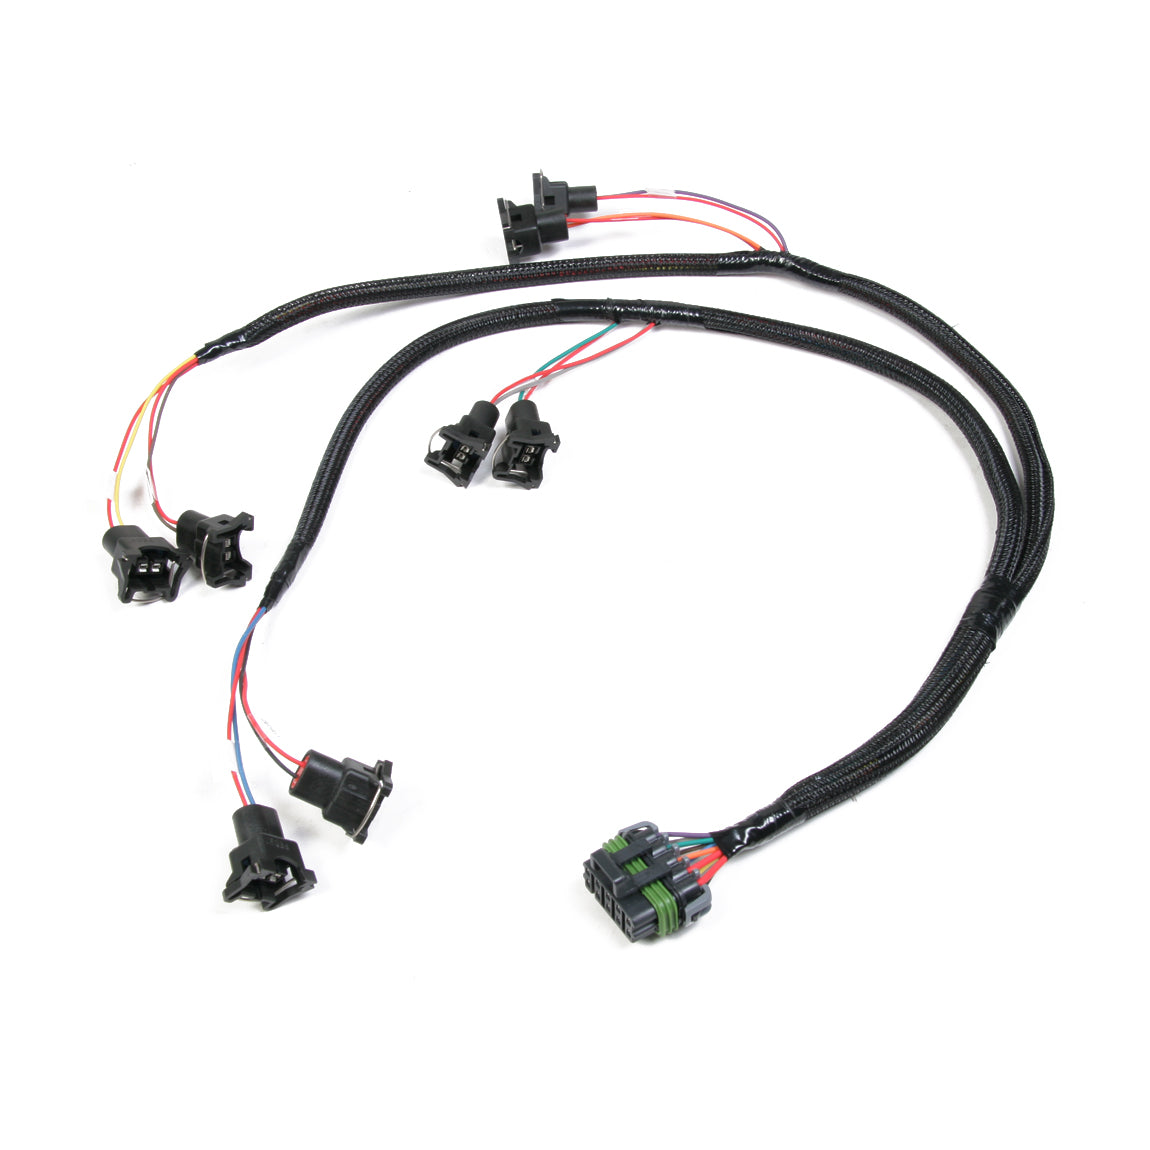 558-200 V8 OVER MANIFOLD, BOSCH STYLE INJECTOR HARNESS